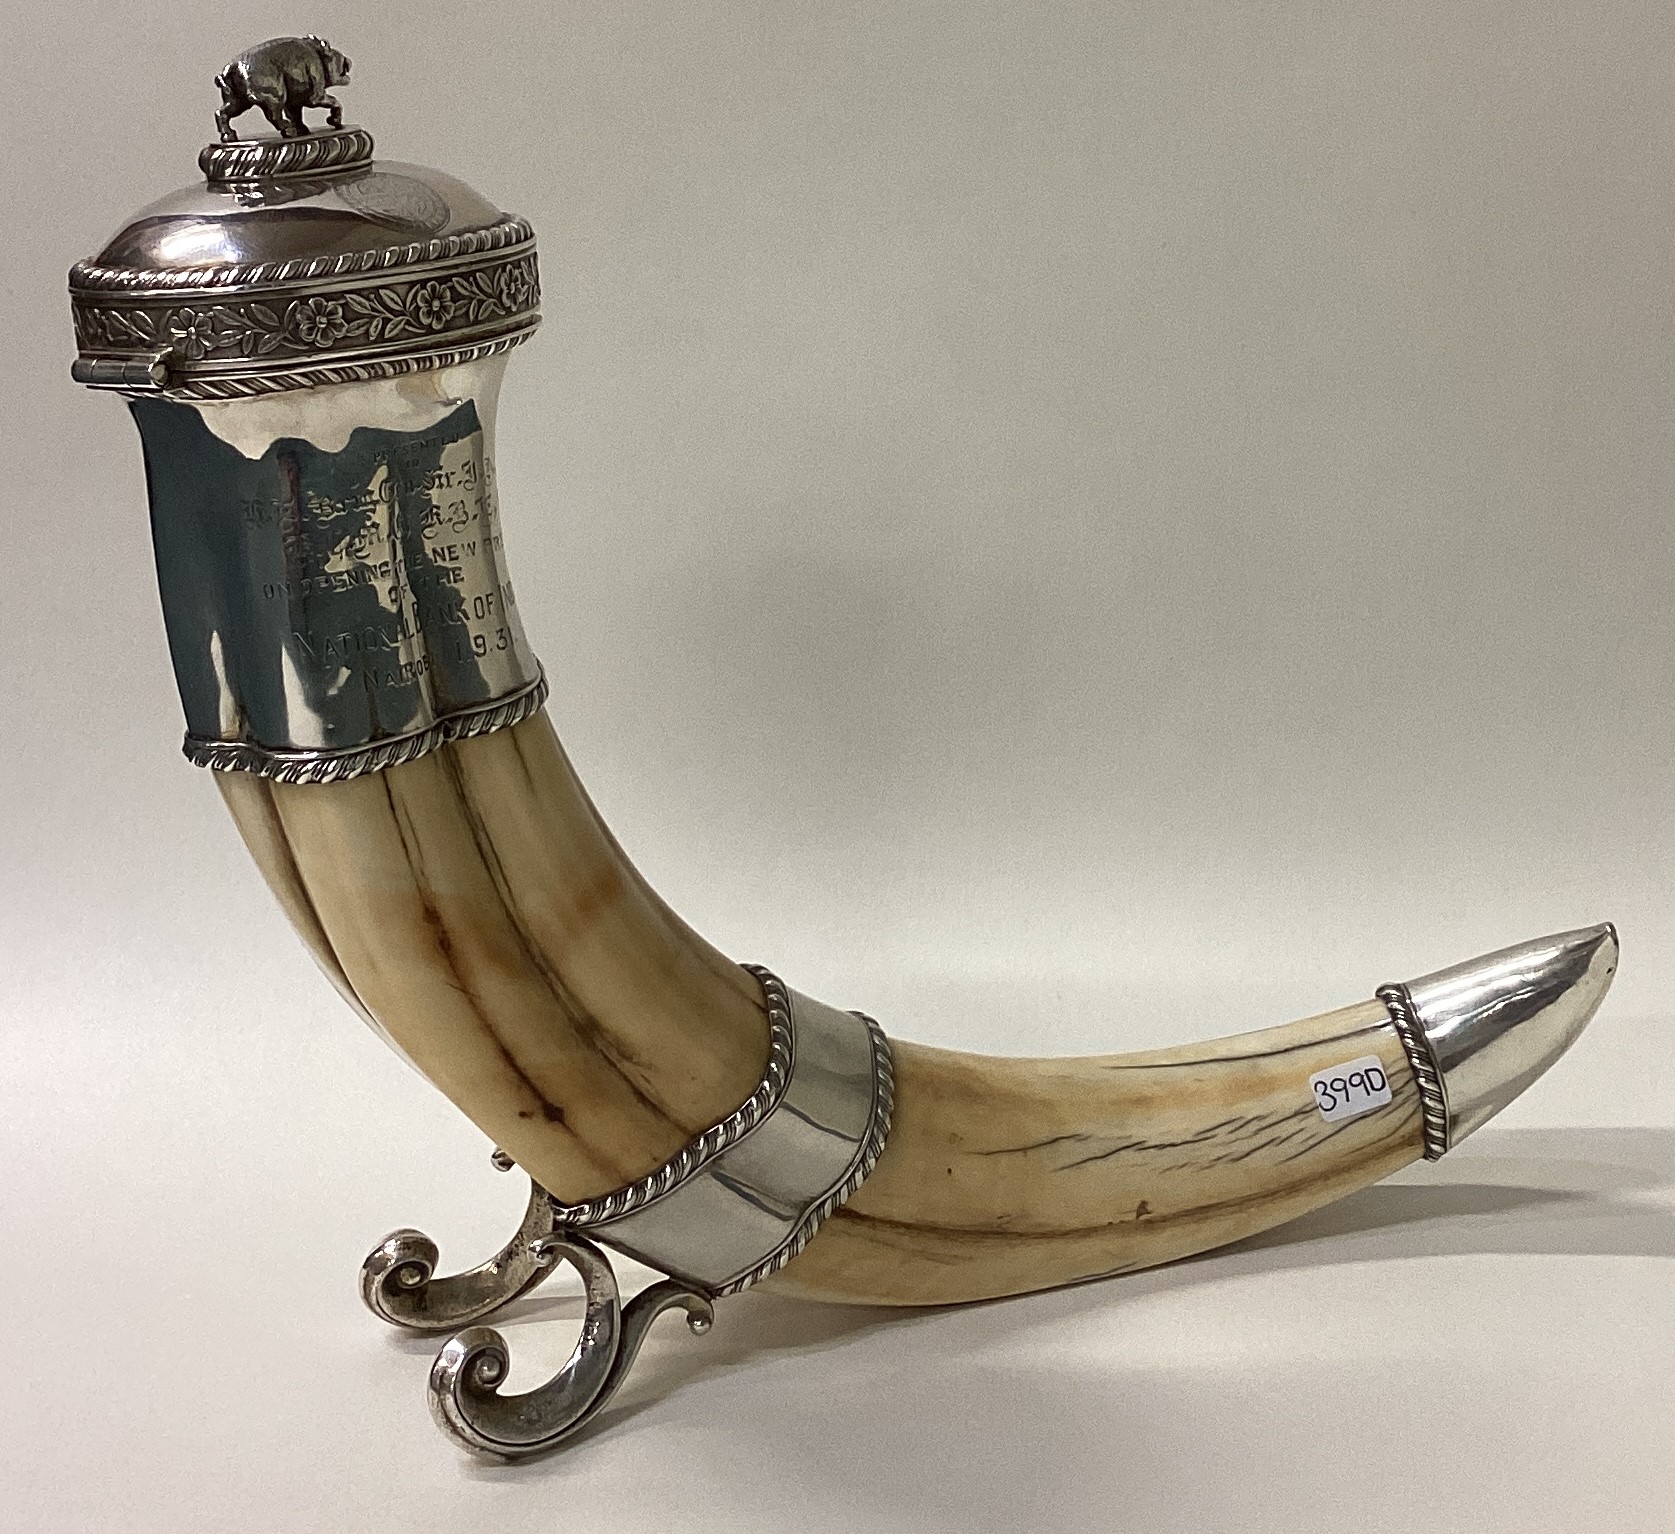 An unusual and rare silver mounted hinged top lighter with warthog finial and engraved decoration. - Image 2 of 6